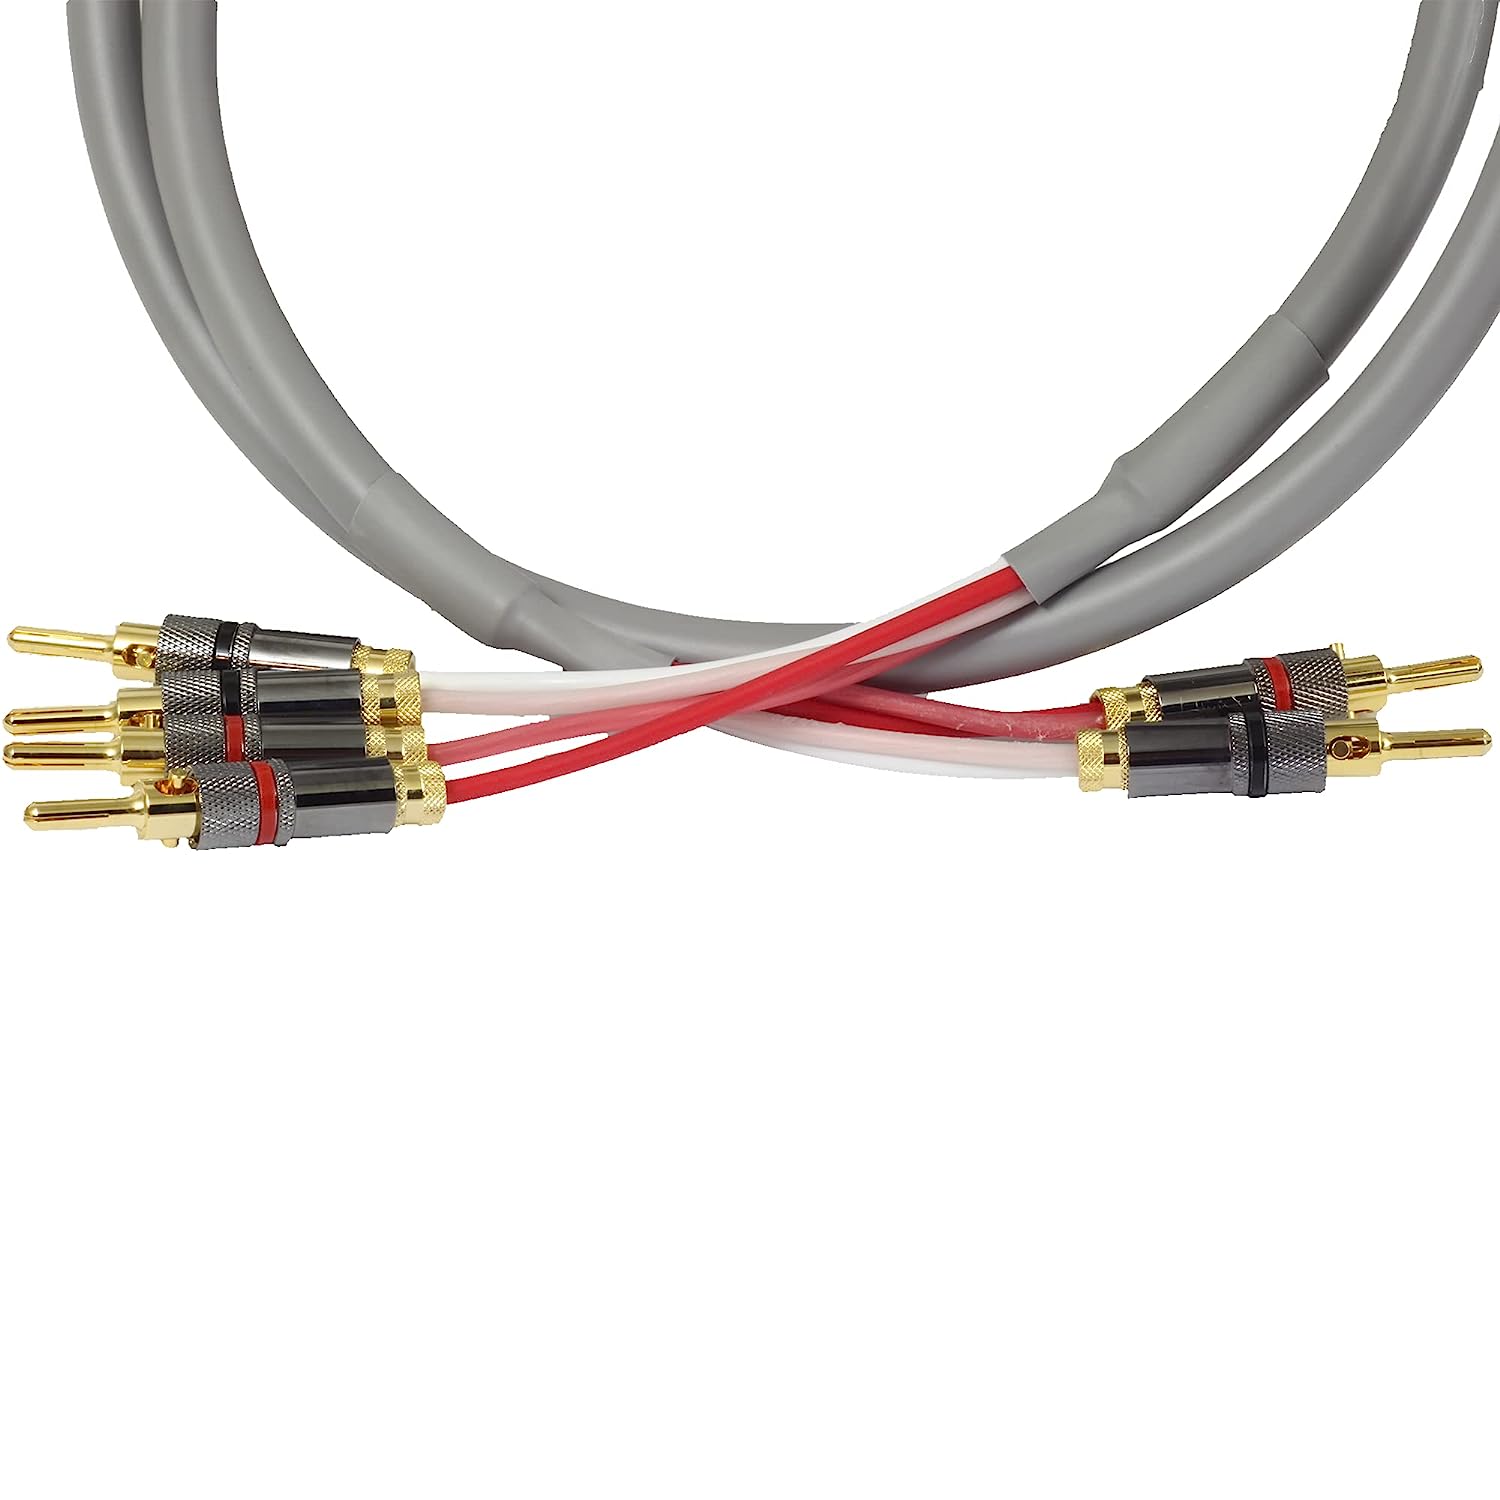 Blue Jeans Cable Canare 4S11 Speaker Cable, with [...]